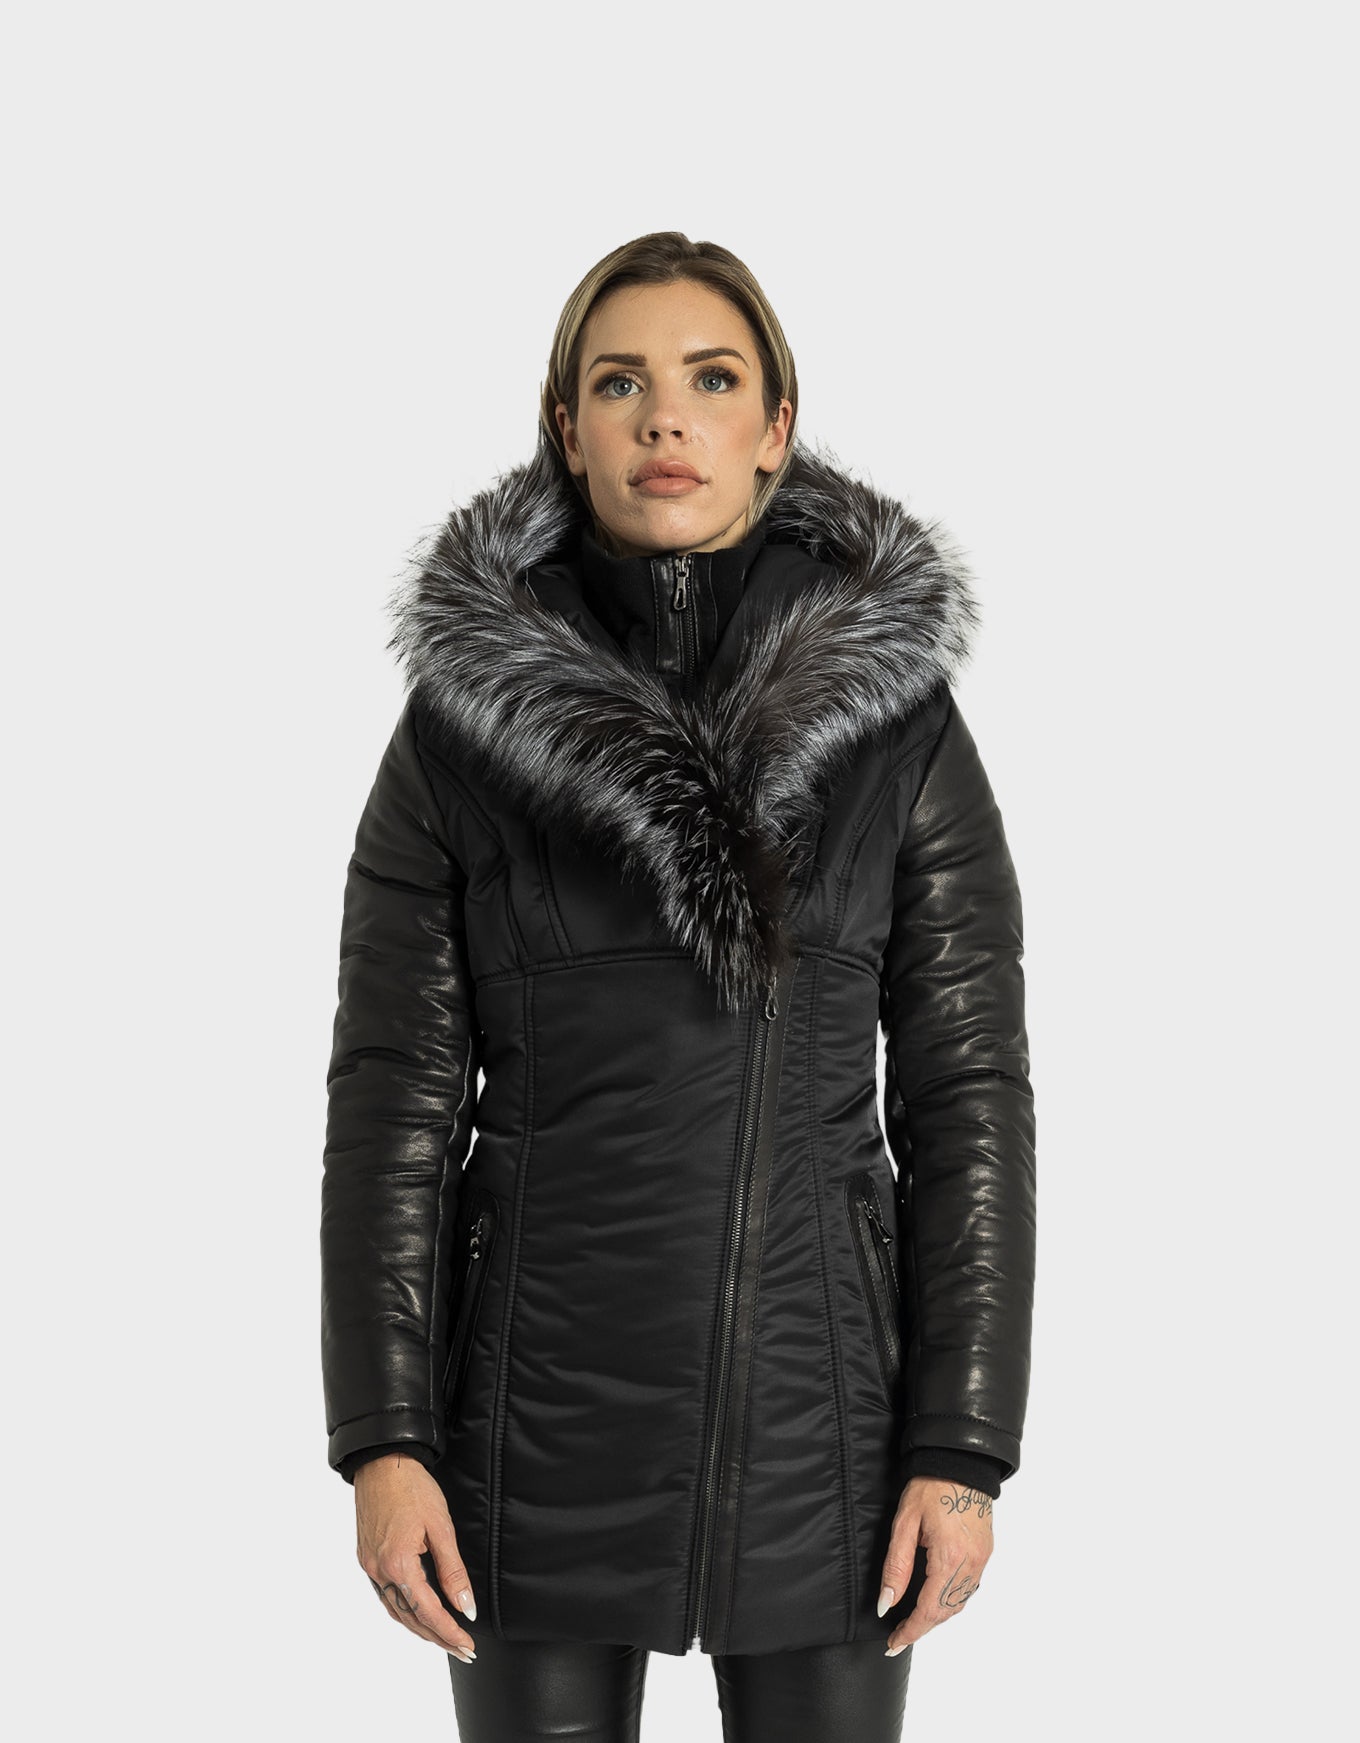 MELANIA Puffer Jacket With Leather Sleeves